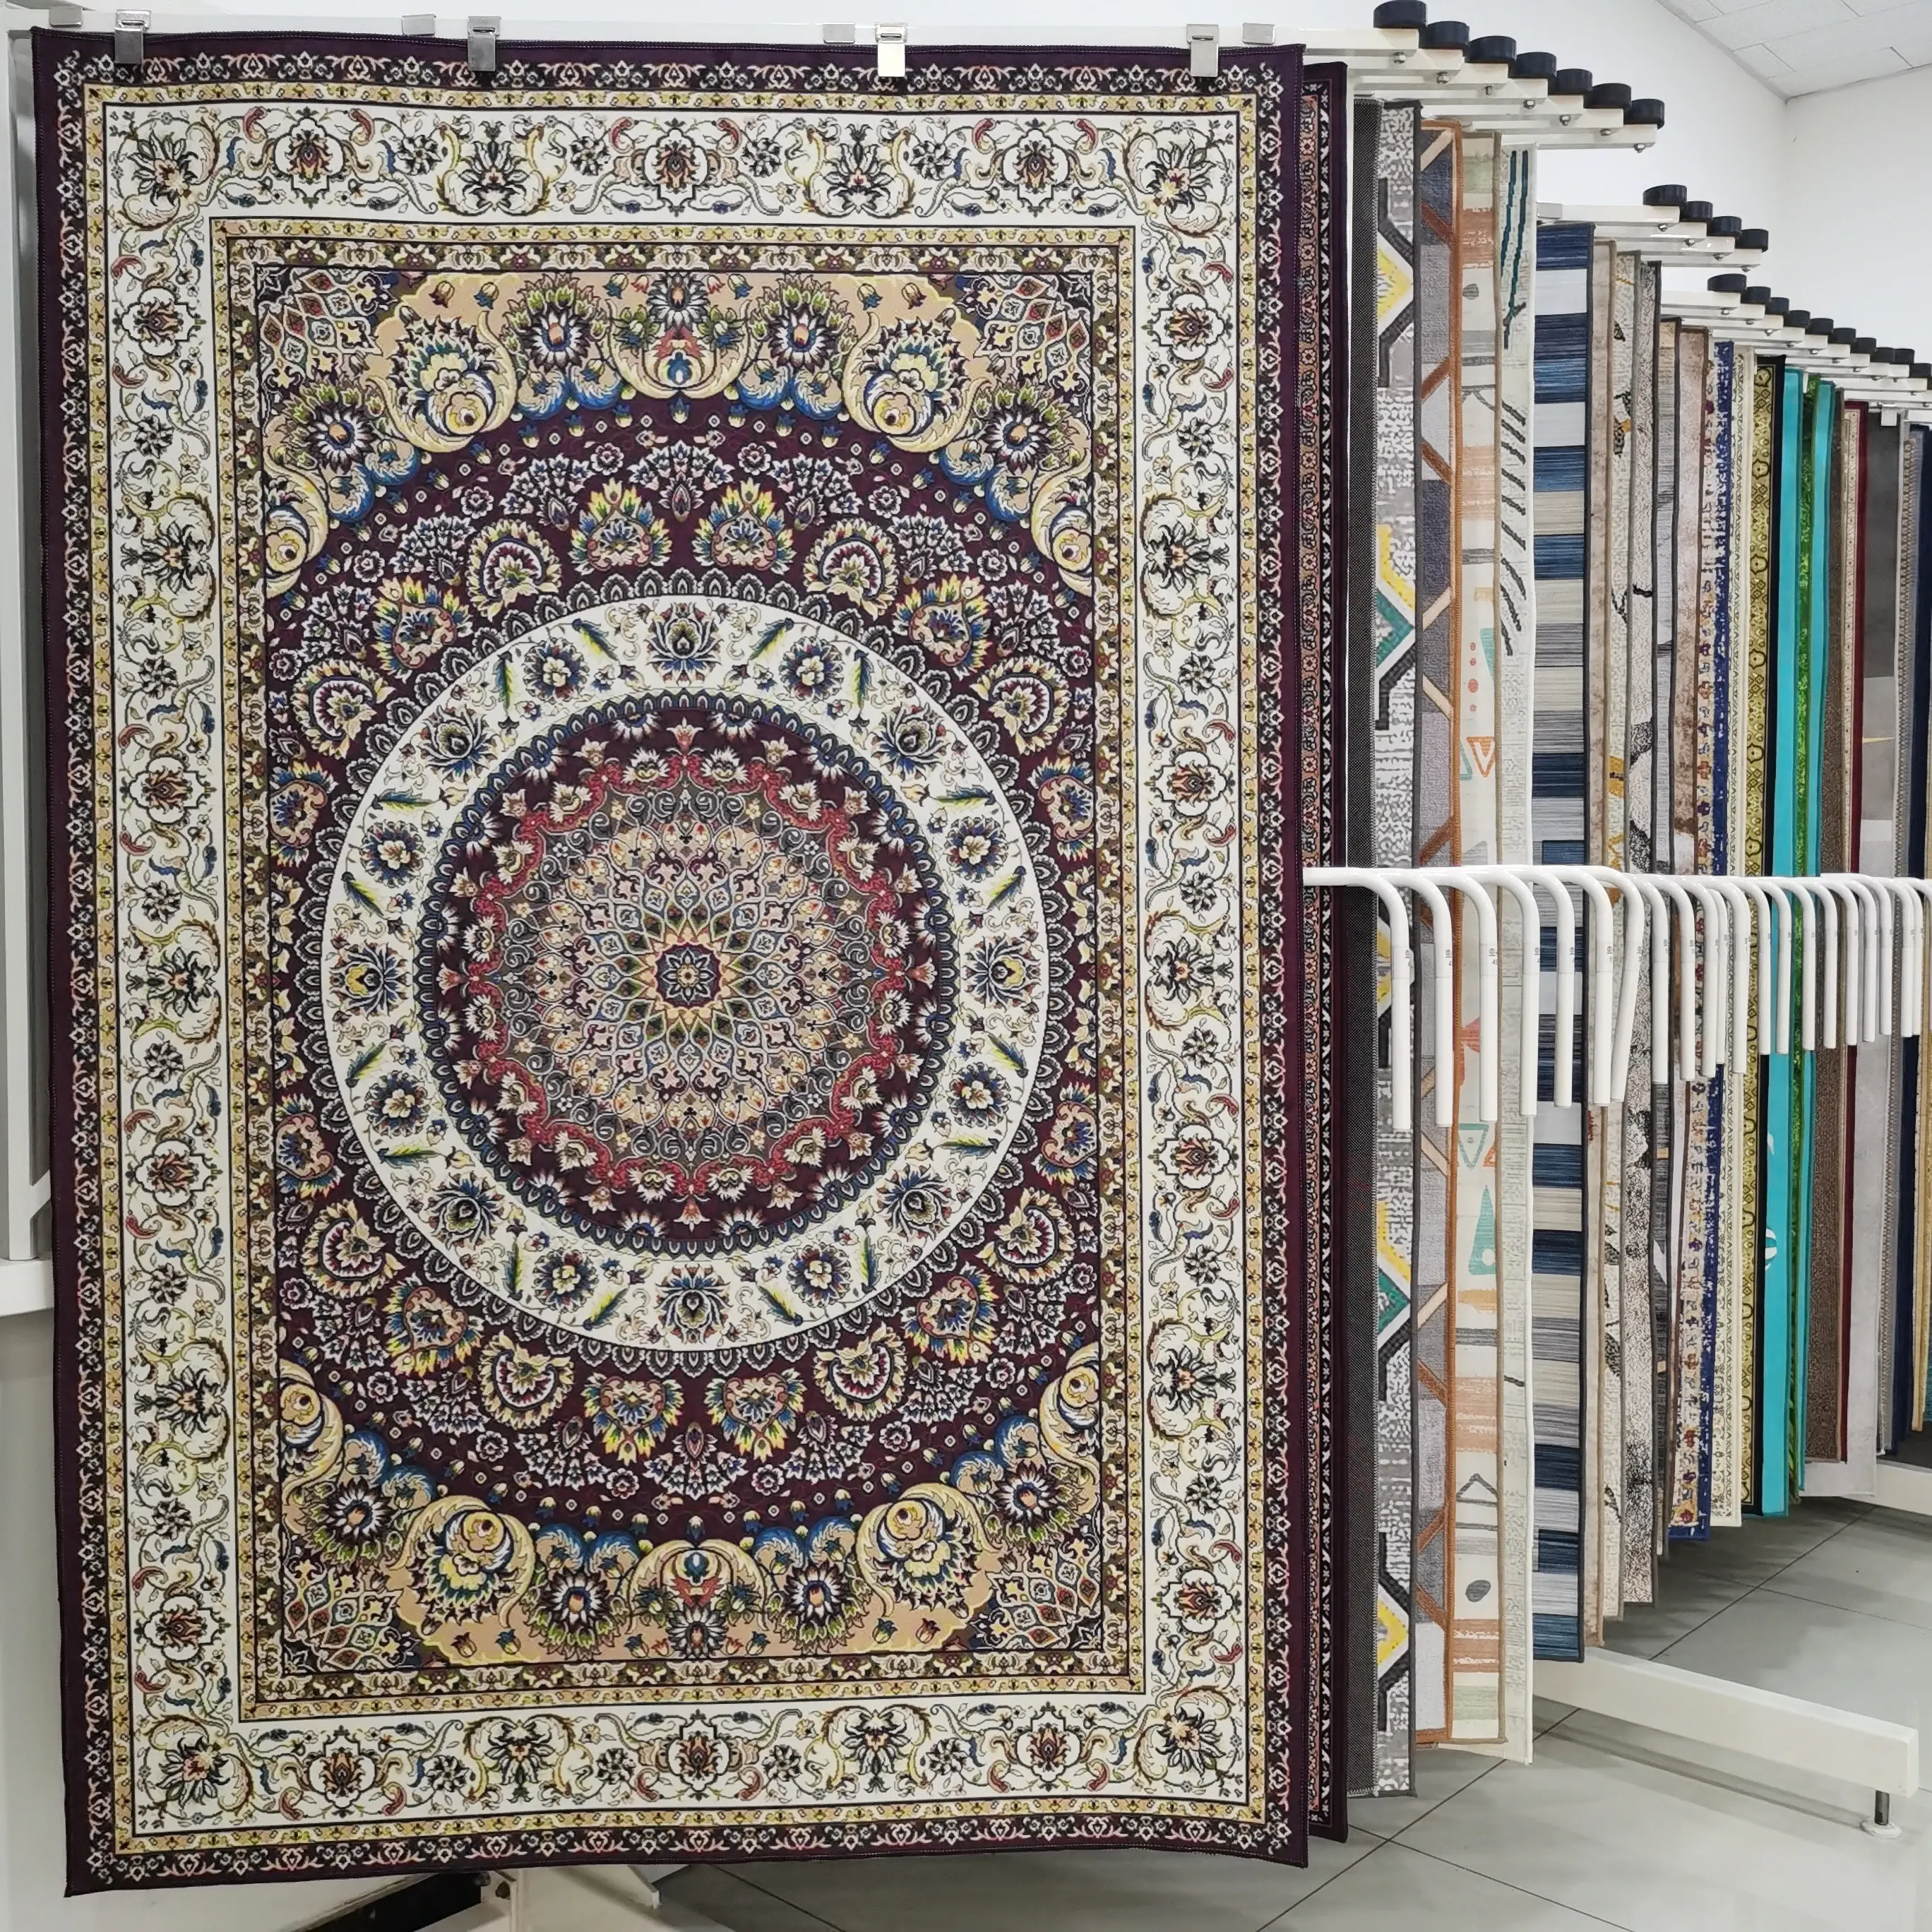 Top quality machine made carpet Luxury Persian rugs for sale